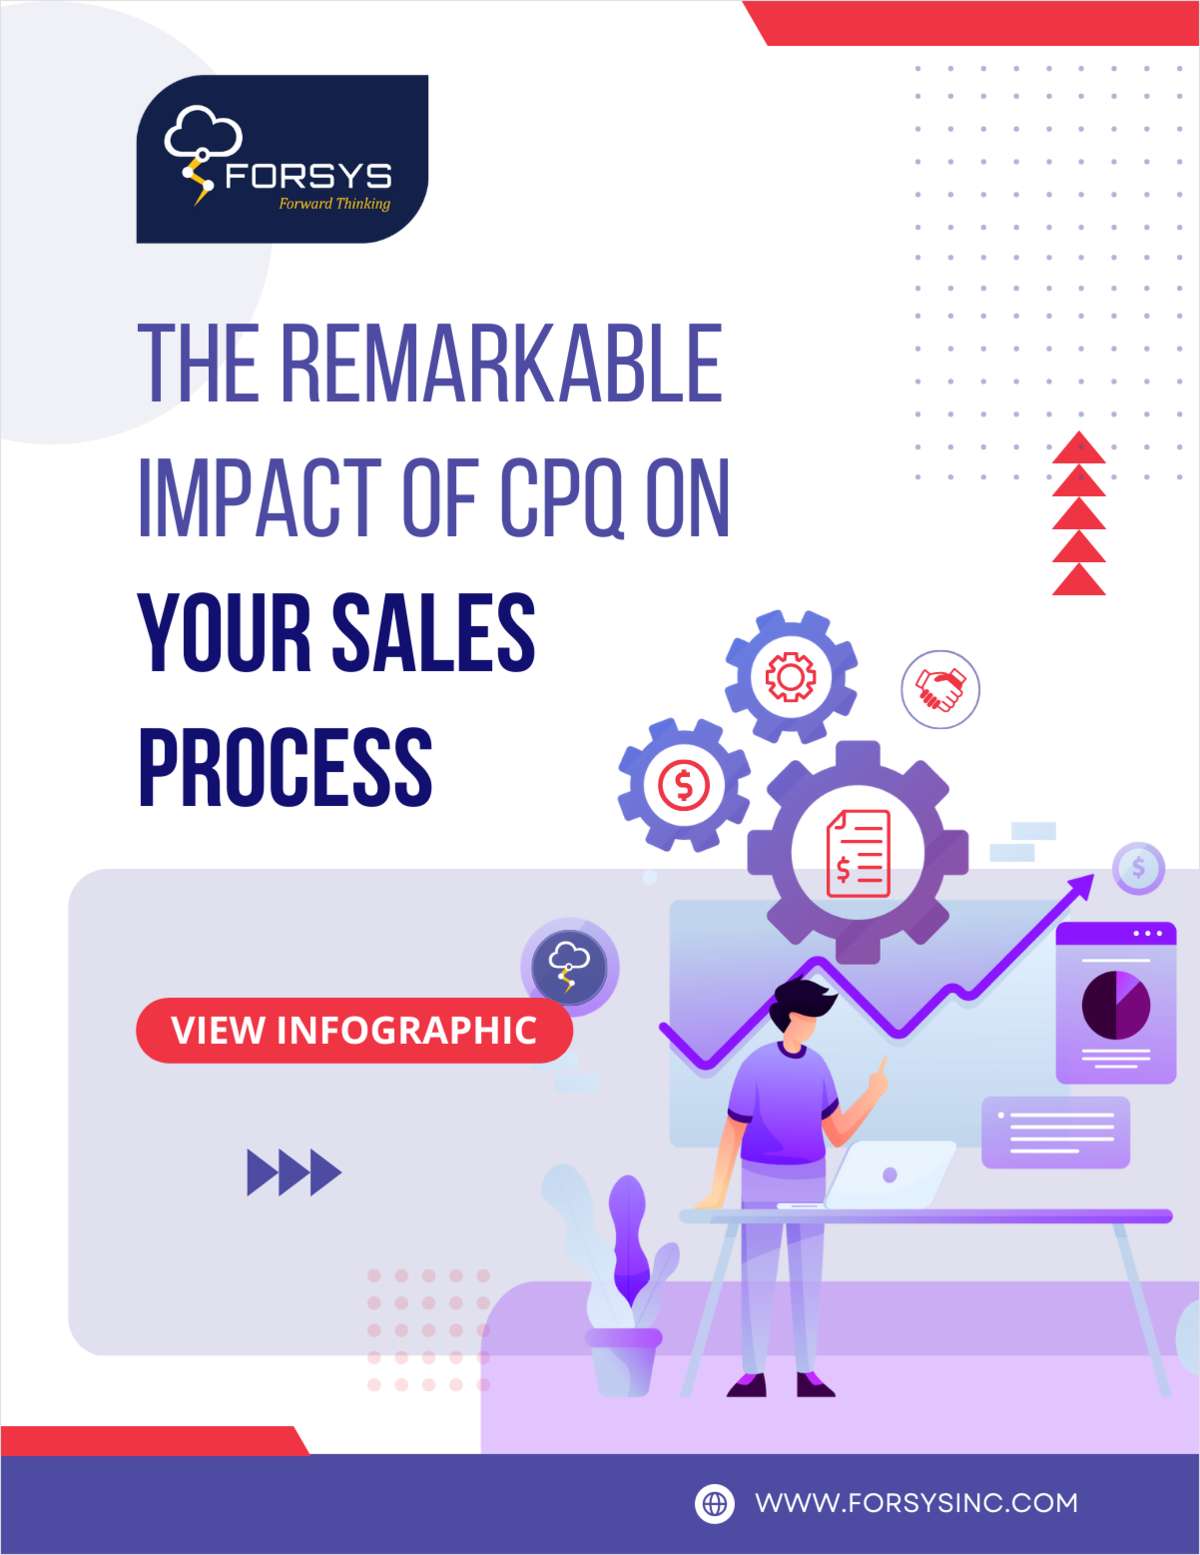 The Remarkable Impact of CPQ on Your Sales Process